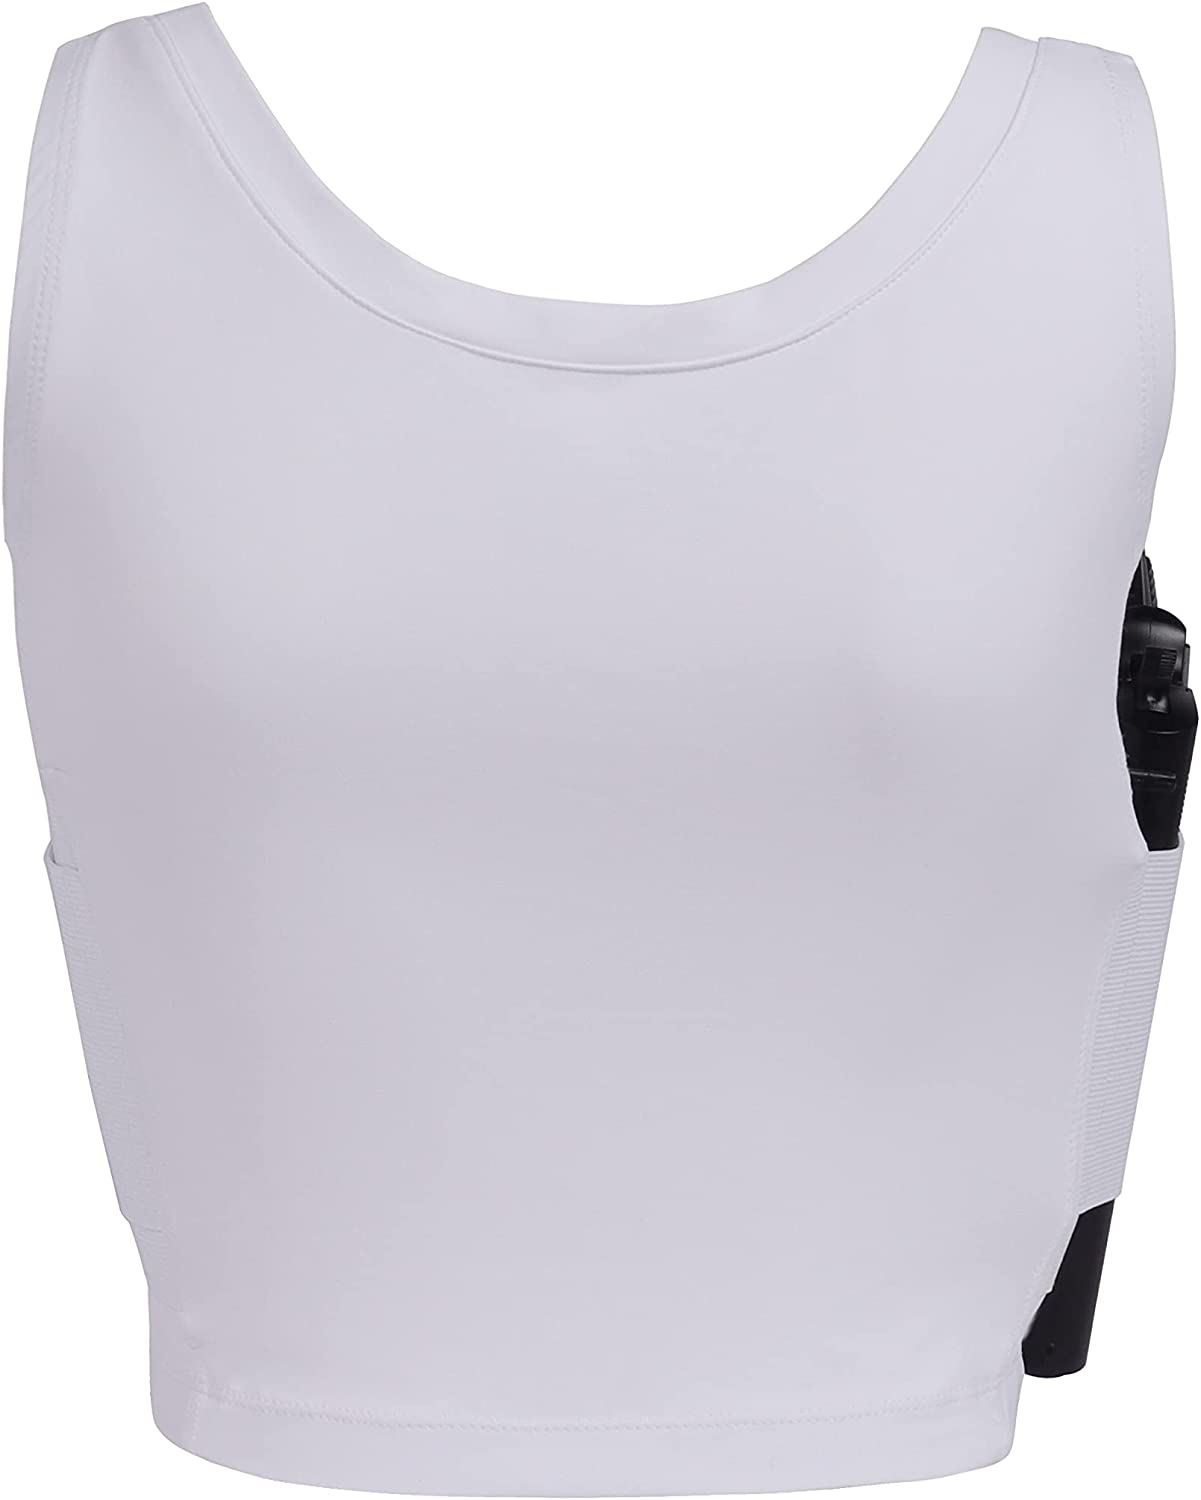 Women Concealed Carry Tank Top